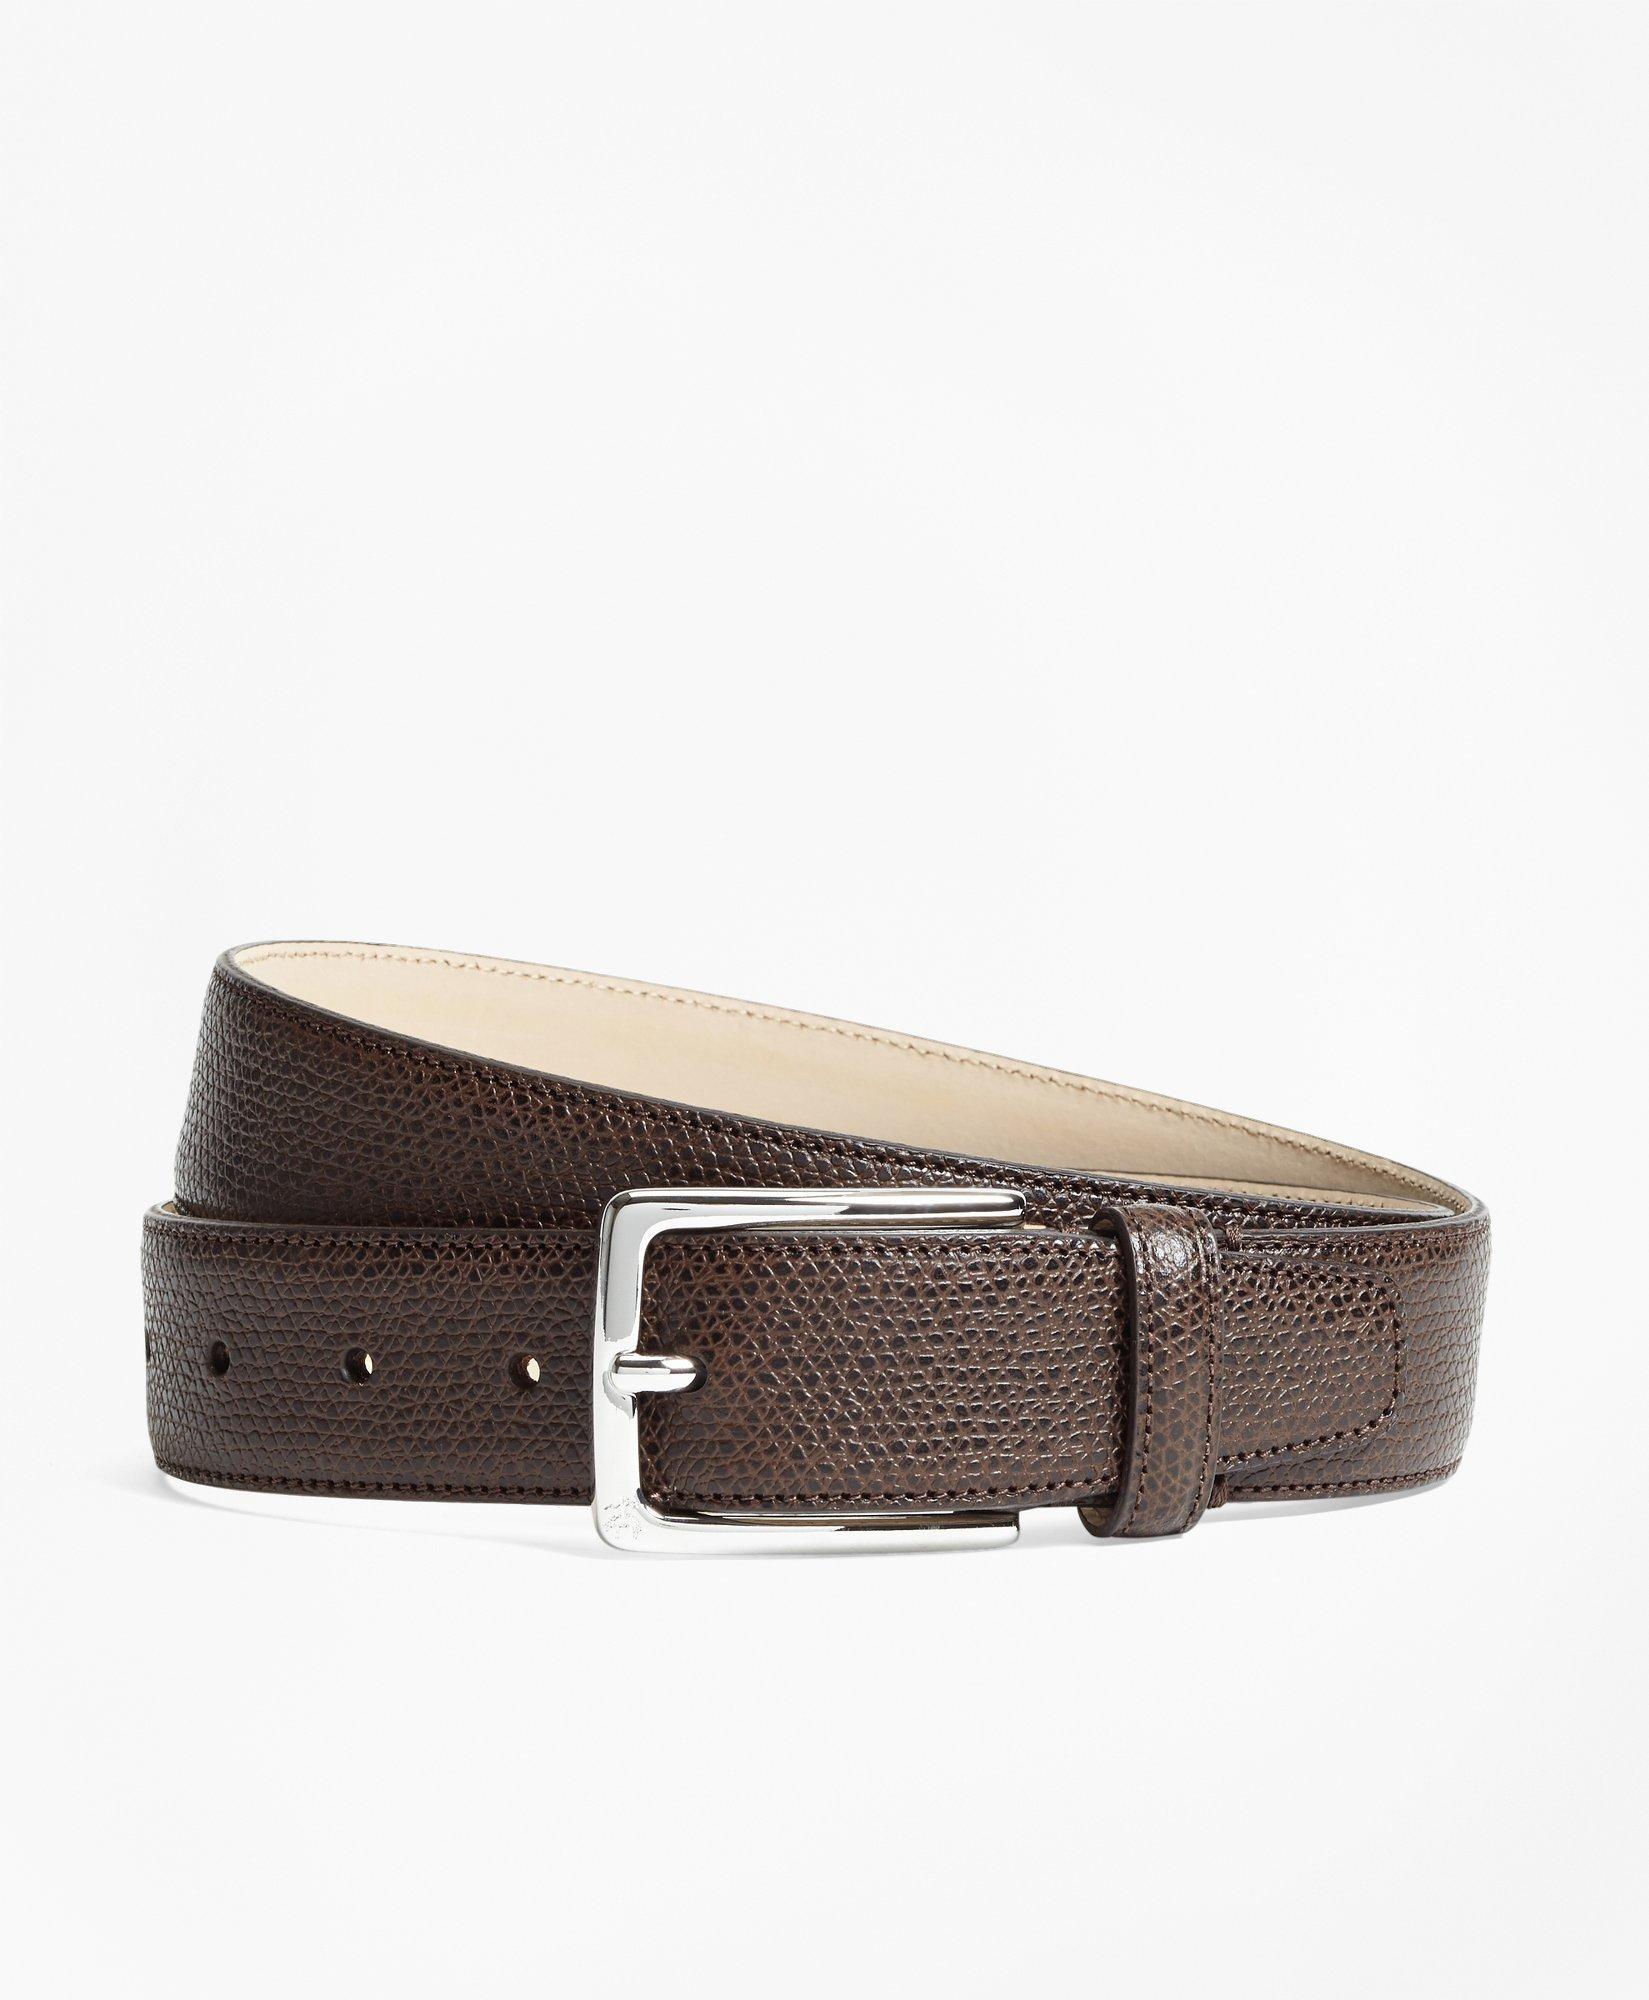 Brooks Brothers 1818 Textured Leather Belt | Brown | Size 34